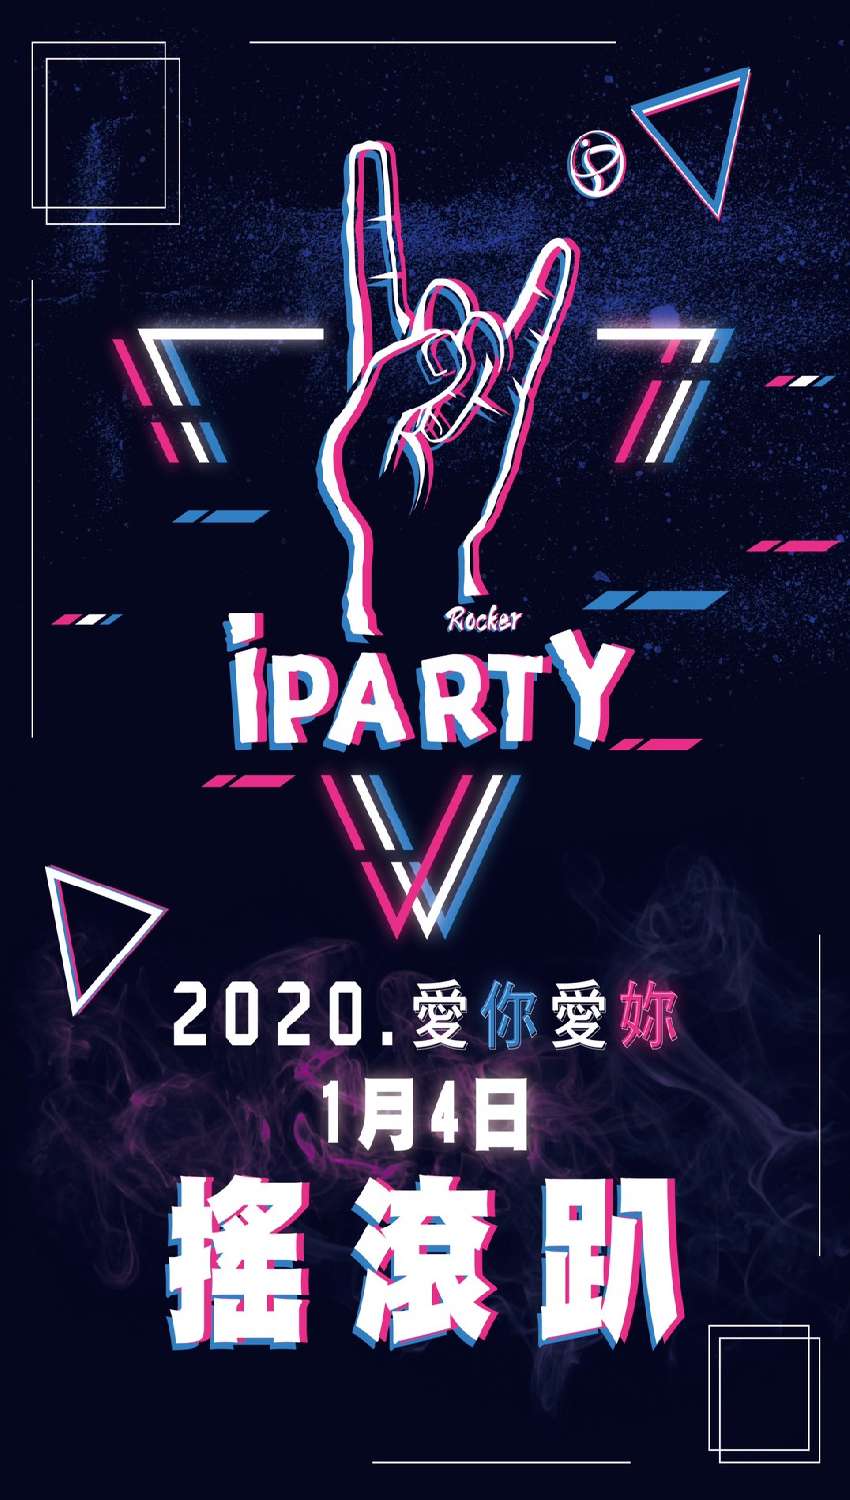 iPARTY VVI